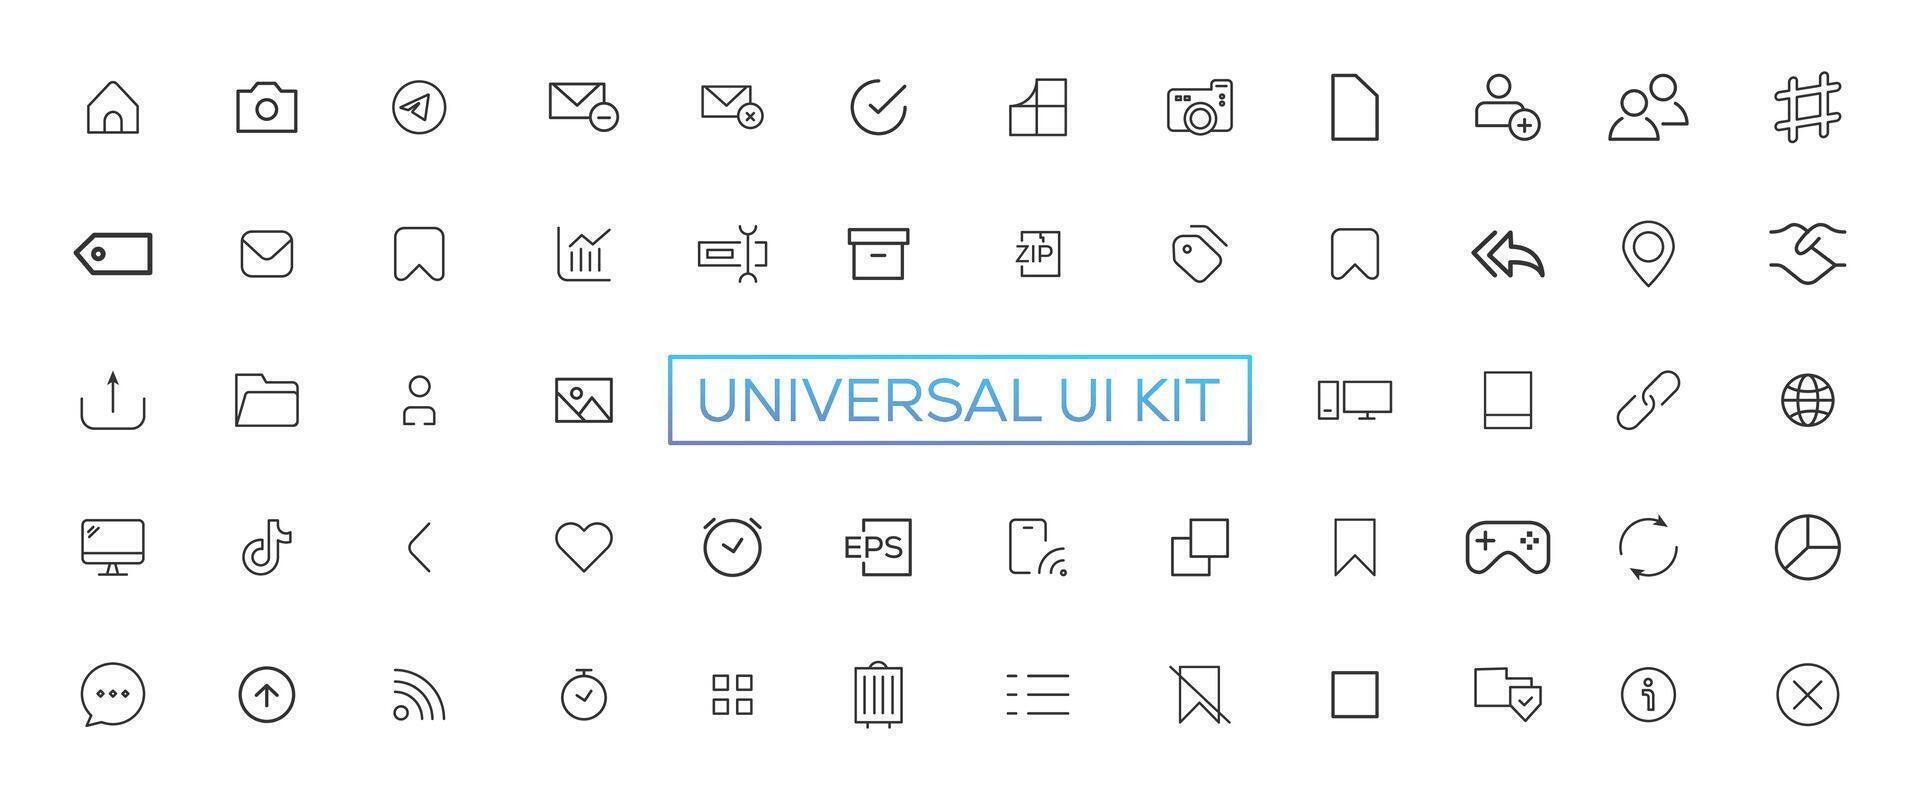 Minimalist and simple looking ui icons set for dark, light mode. Outline isolated user interface elements for night, day themes vector